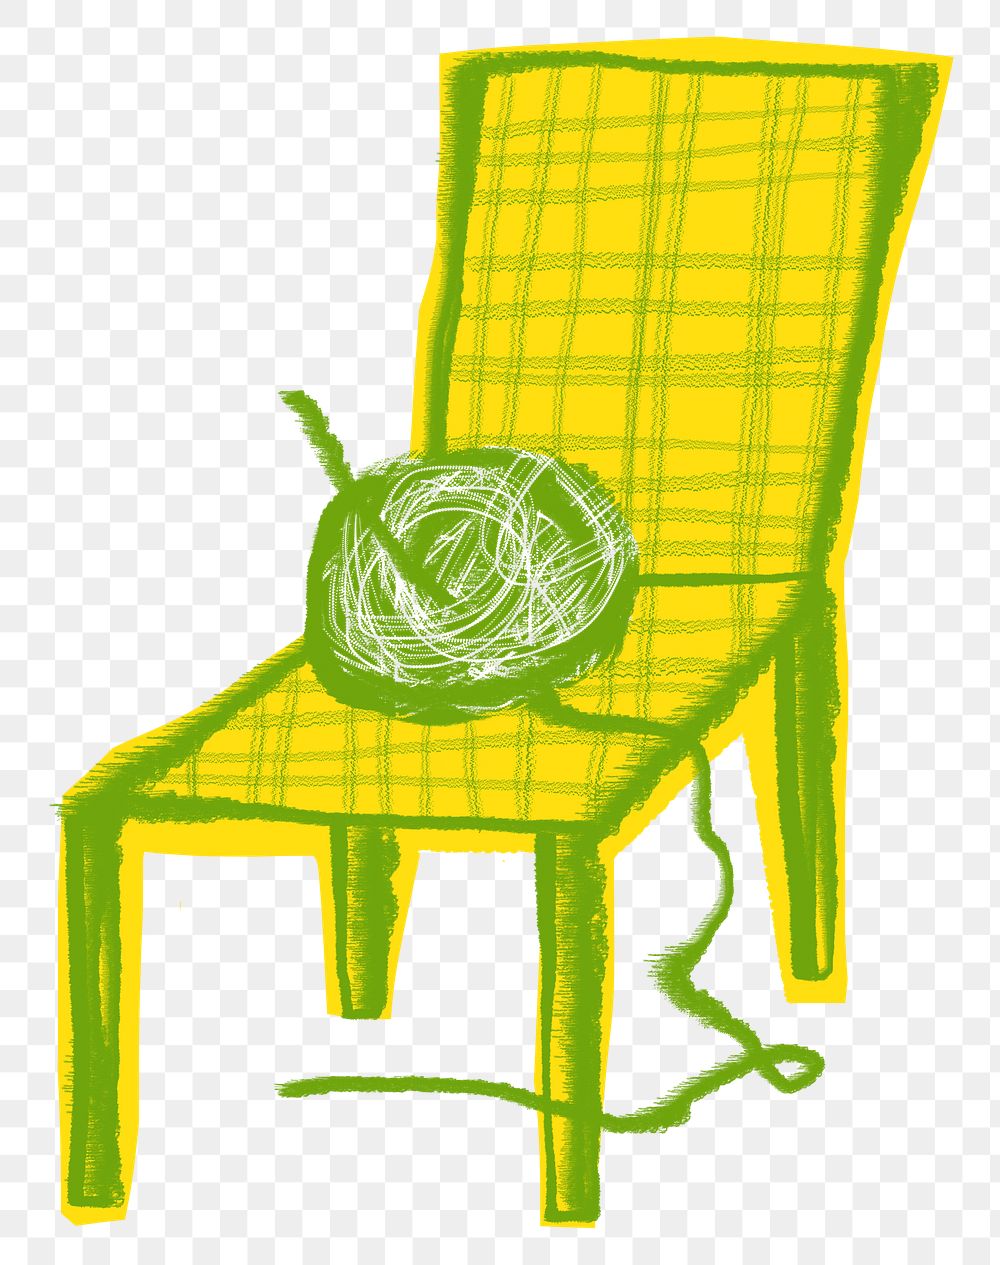 Crochet on armchair png sticker, hobby doodle, transparent background